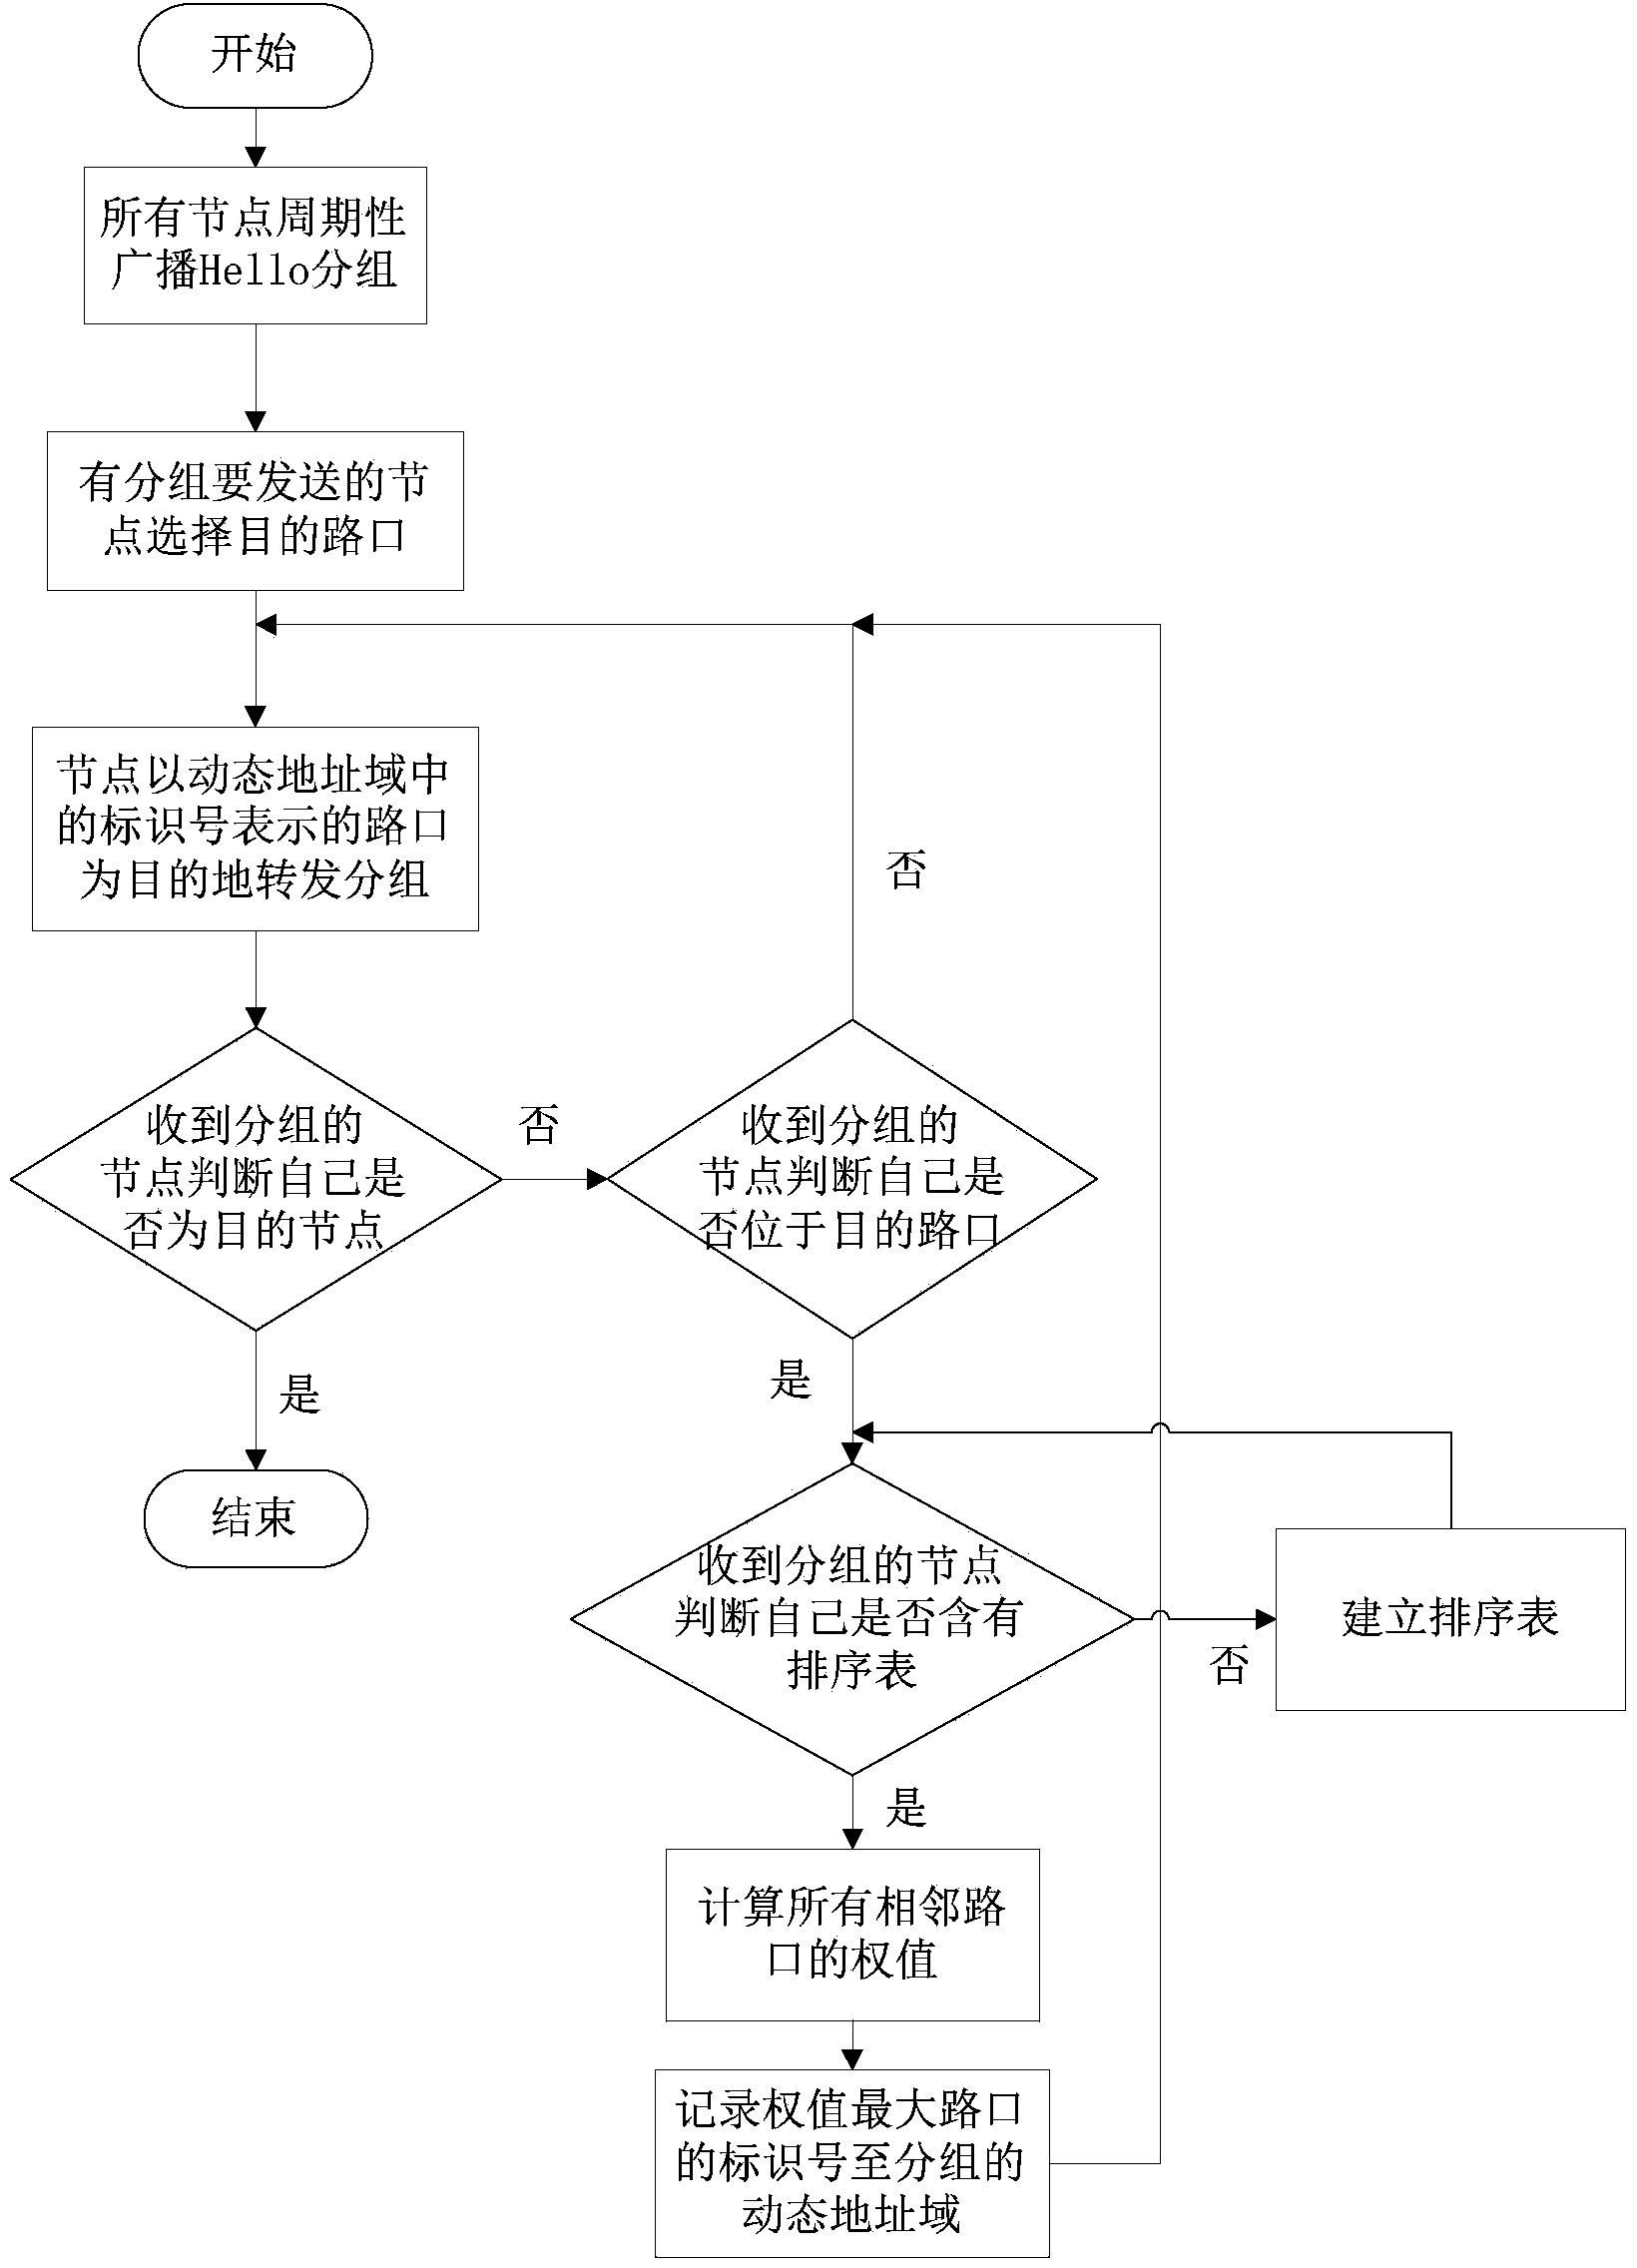 Routing method based on three-dimensional scene in vehicle self-organizing network